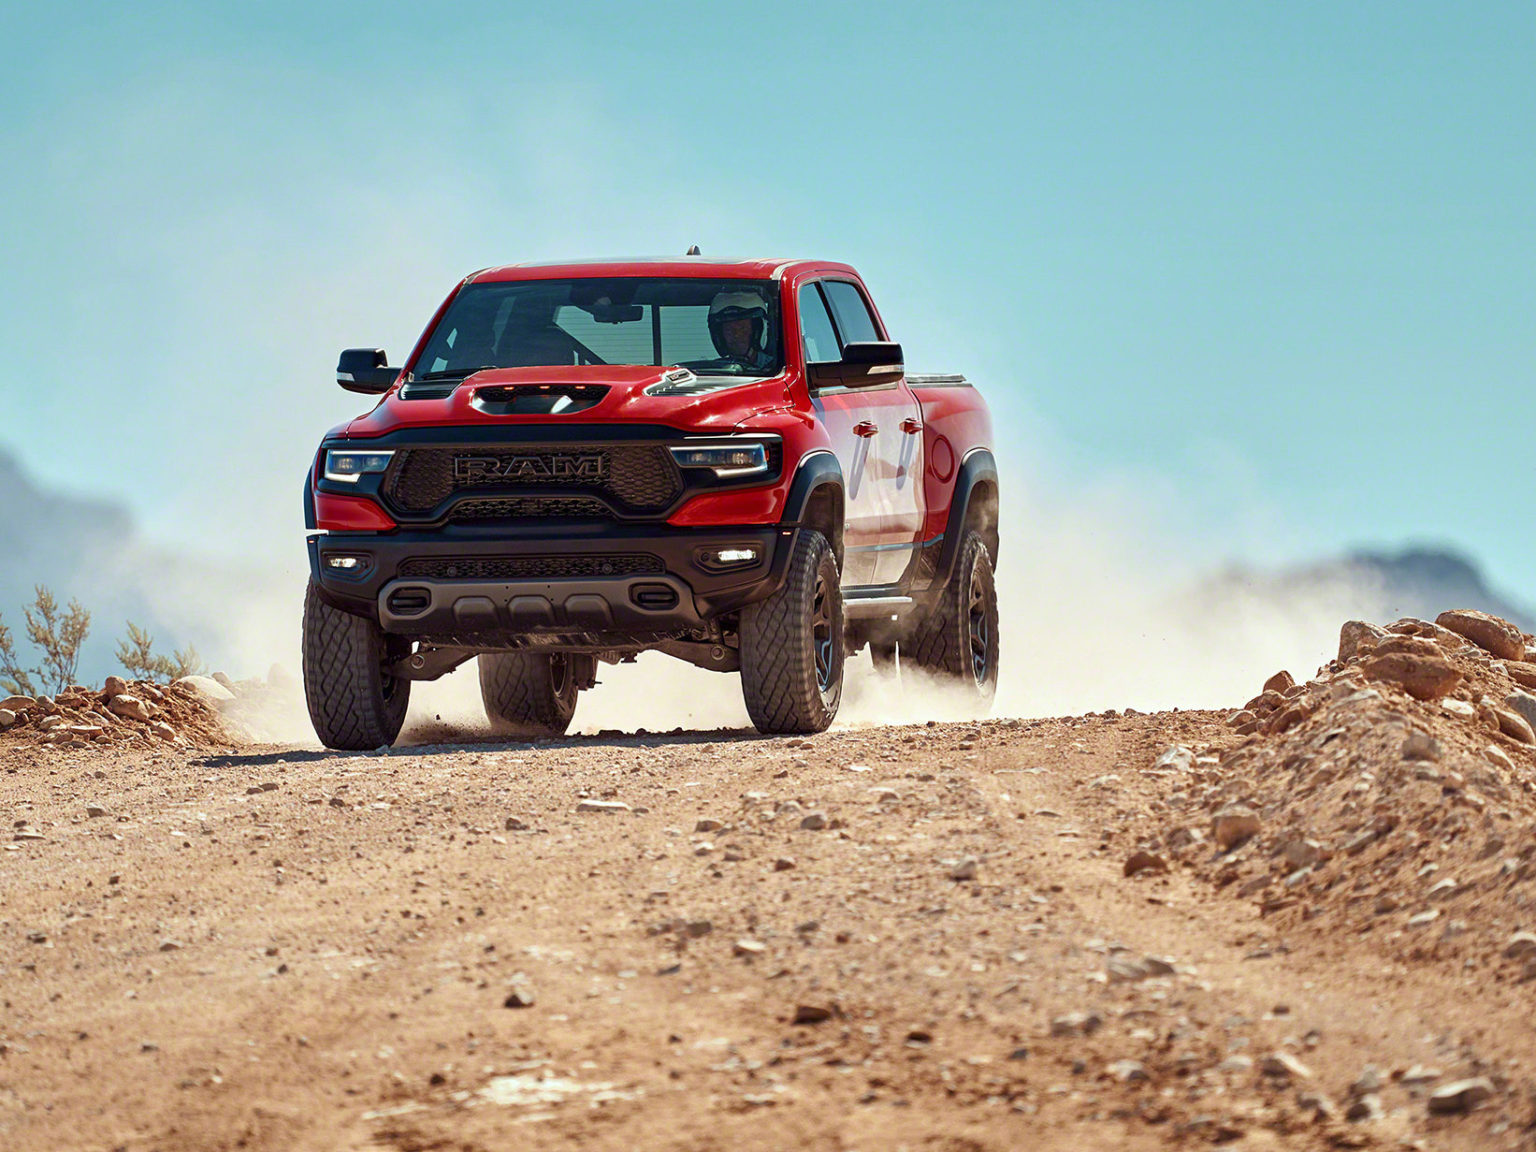 The new Ram 1500 TRX has the Ford Raptor in its sights.